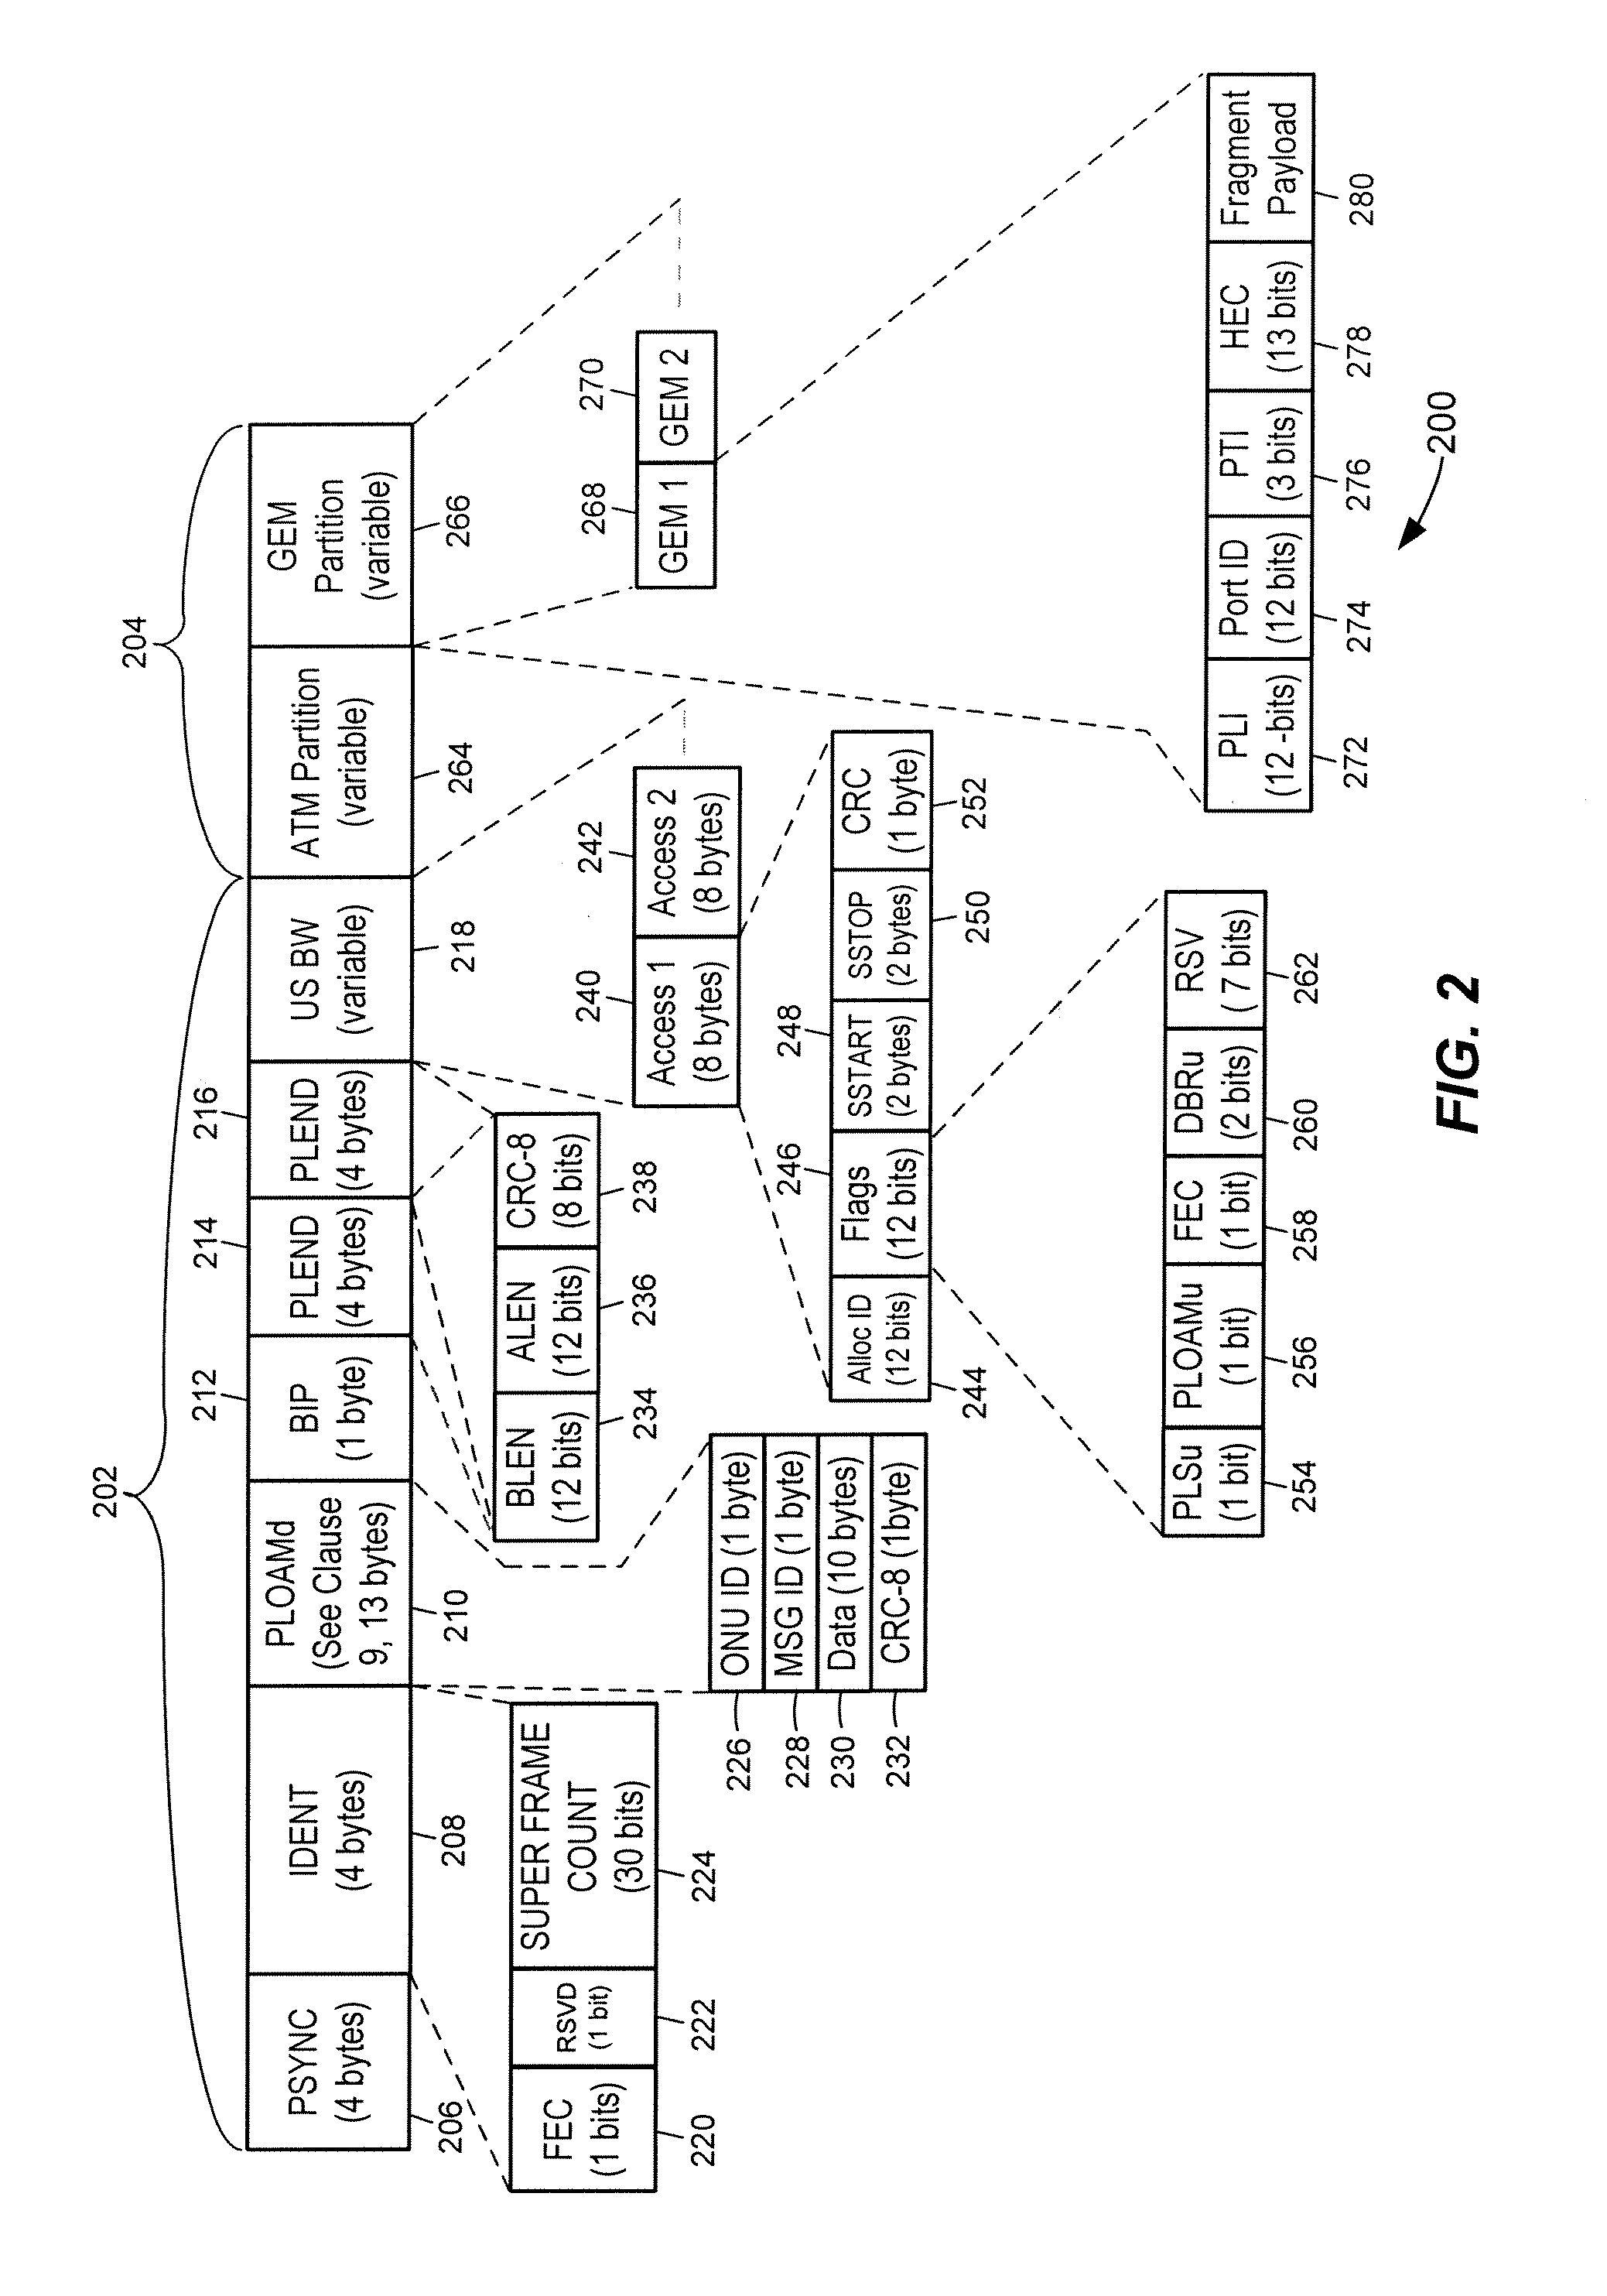 Optical line termination in a passive optical network